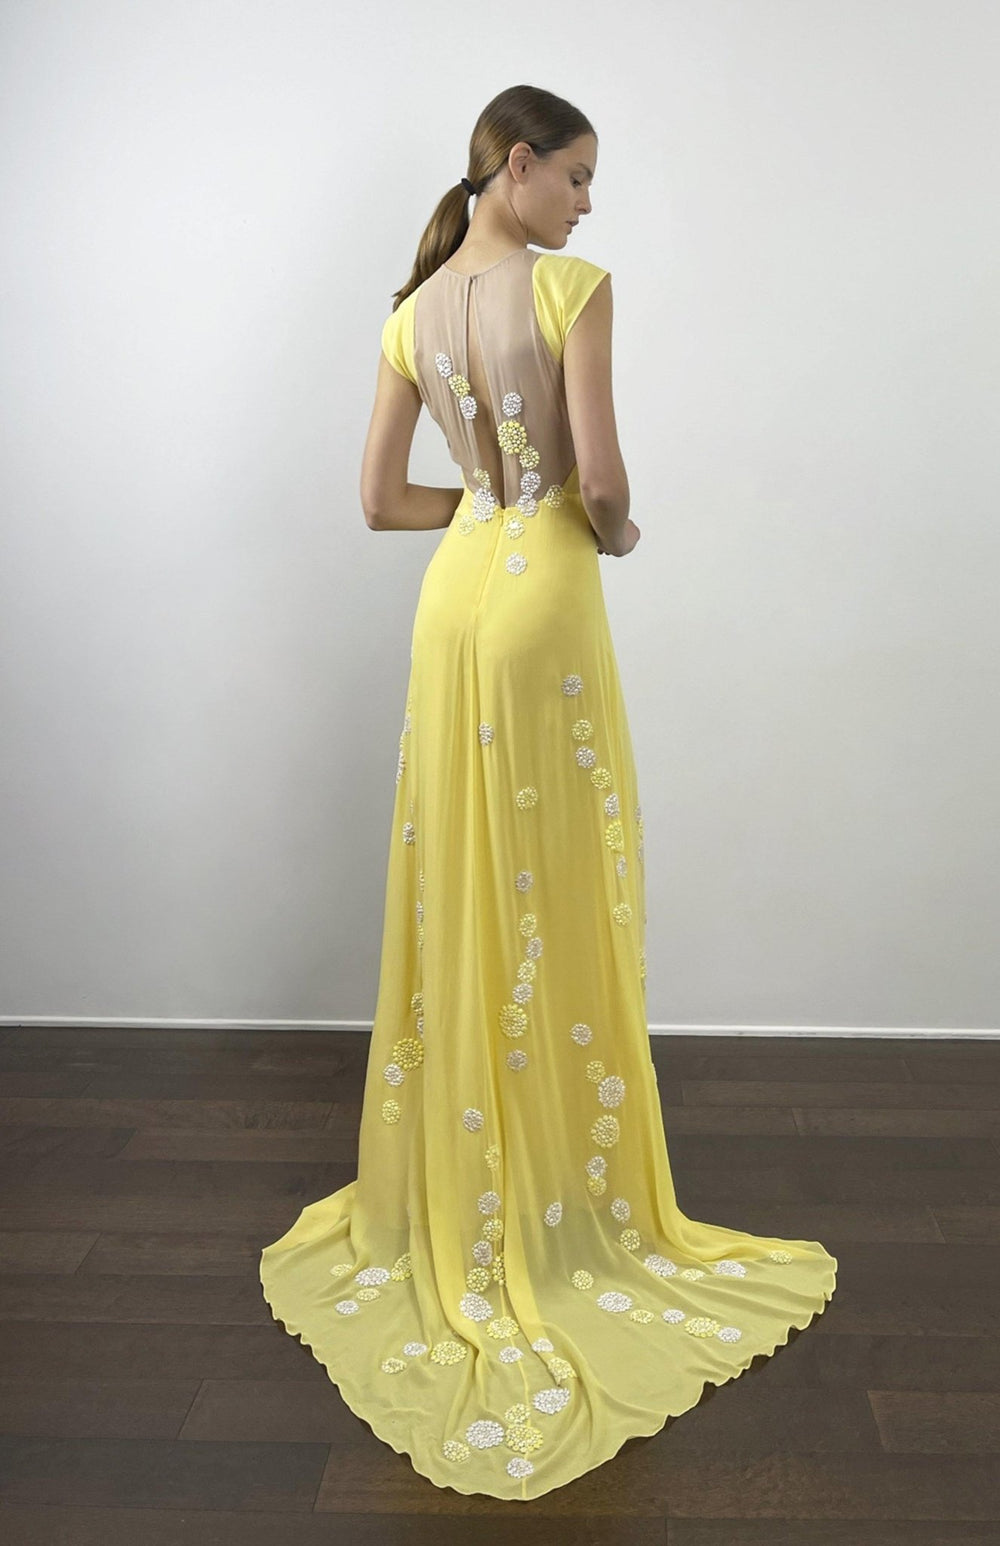 Elegant, Yellow, sleeveless, long evening dress with sheer, nude panels, hand applique lace embellishment and long train.